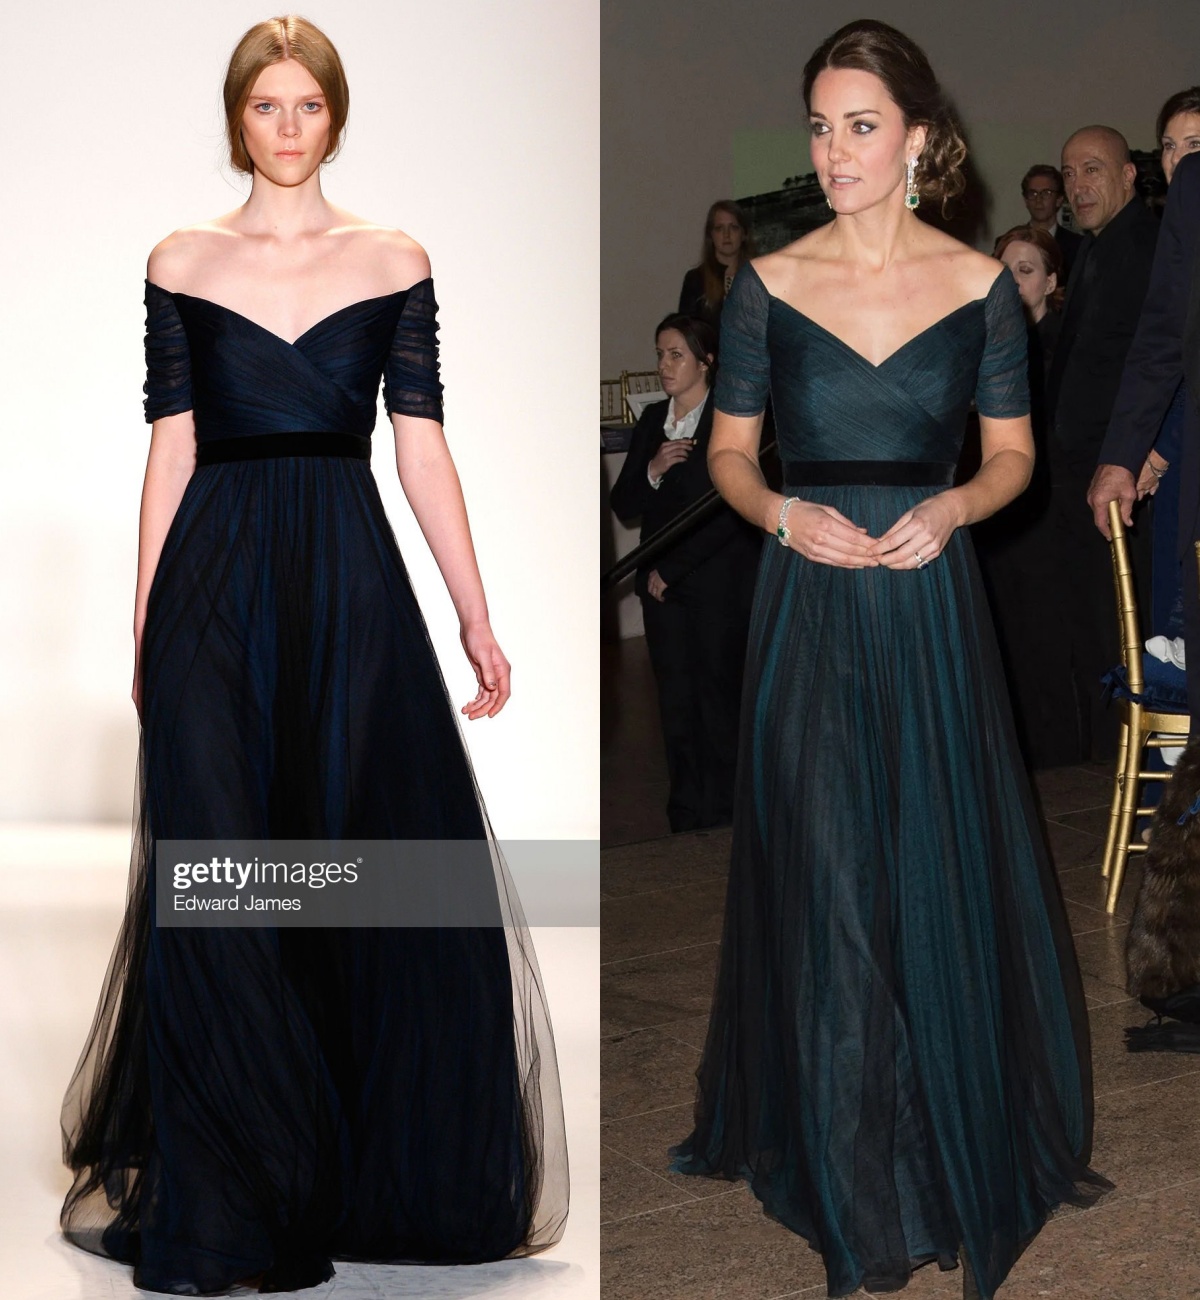 7 times Kate Middleton dresses better than the model, proving the temperament of the Royal Princess - Photo 6.